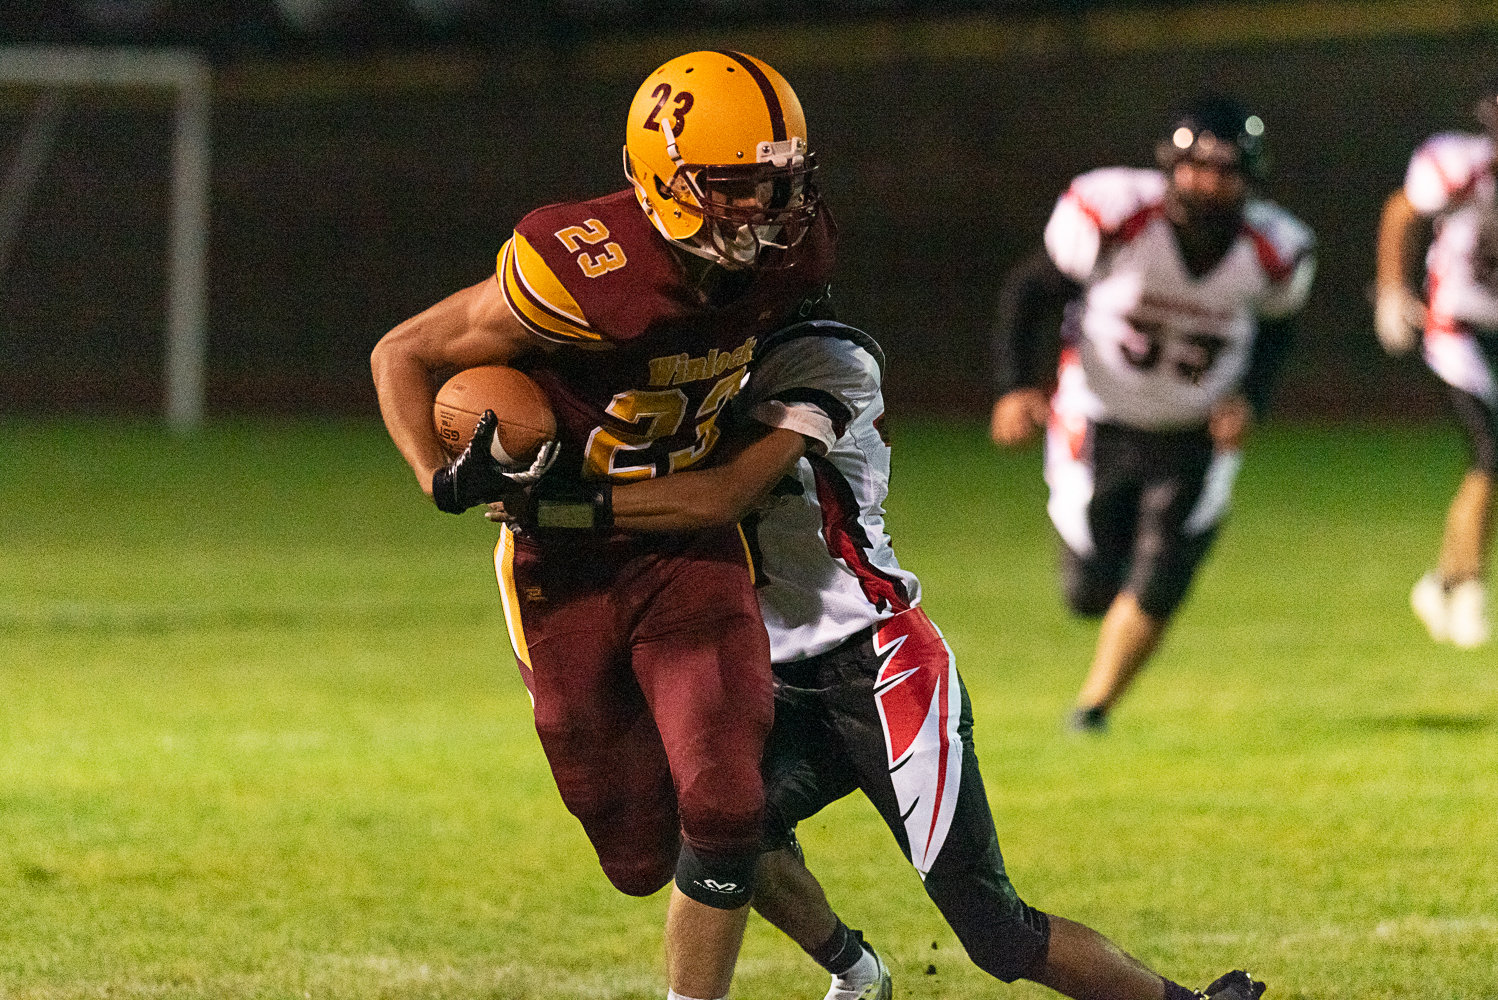 Winlock's Lincoln Ruiz racks up yards after a catch during the first quarter of the Cardinals' 36-28 win over Oakville on Oct. 7.